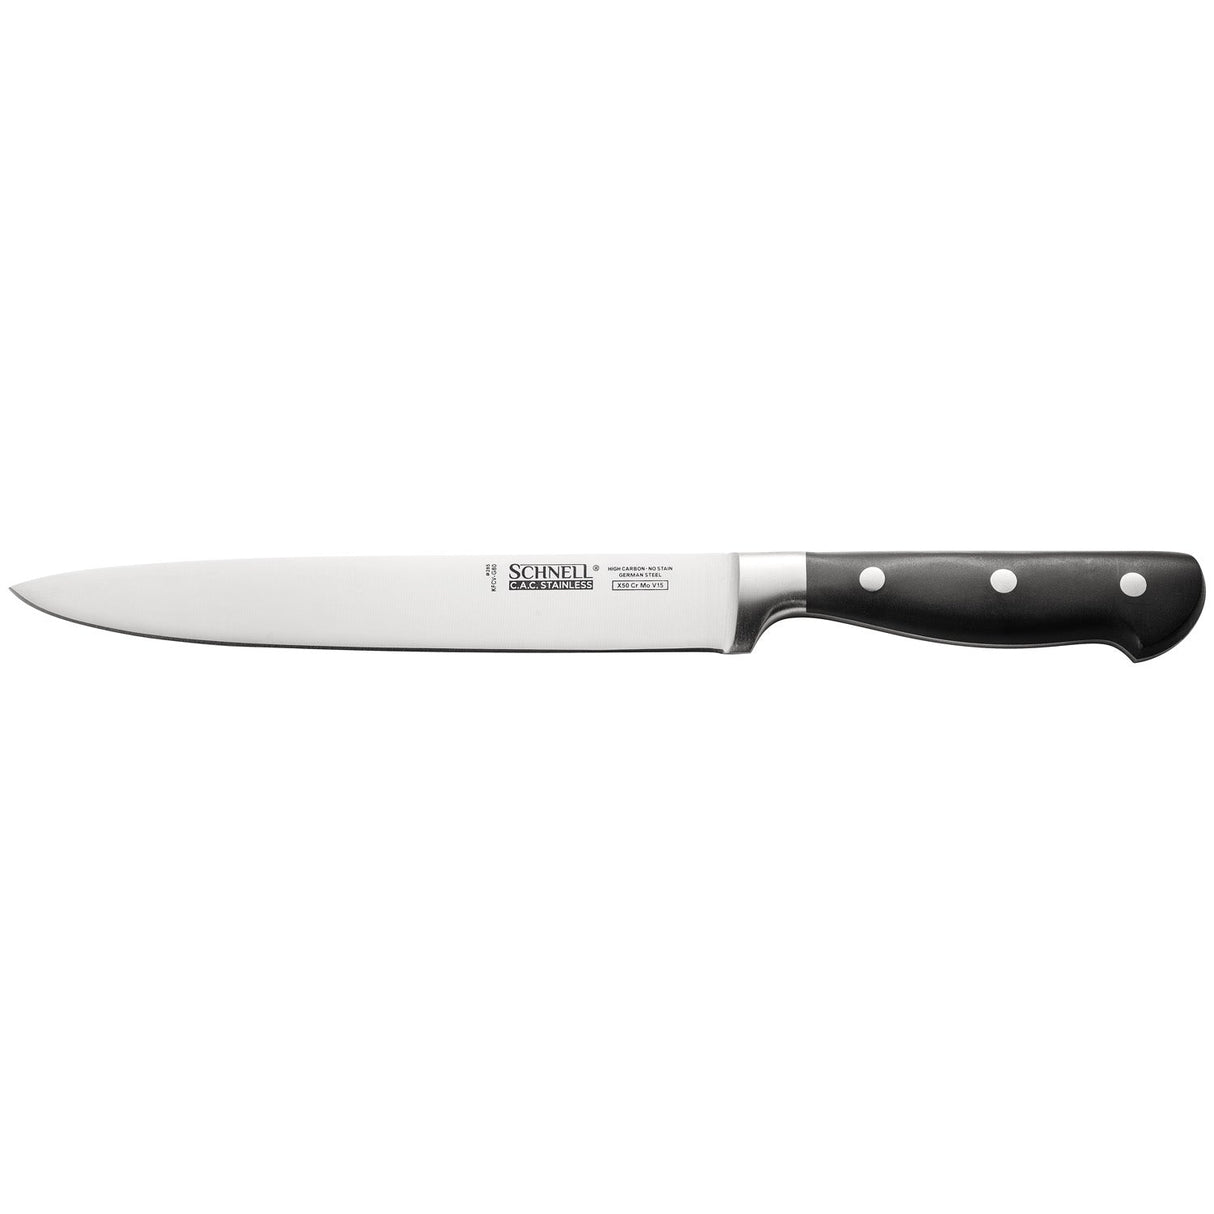 Schnell Carving Knife 8"